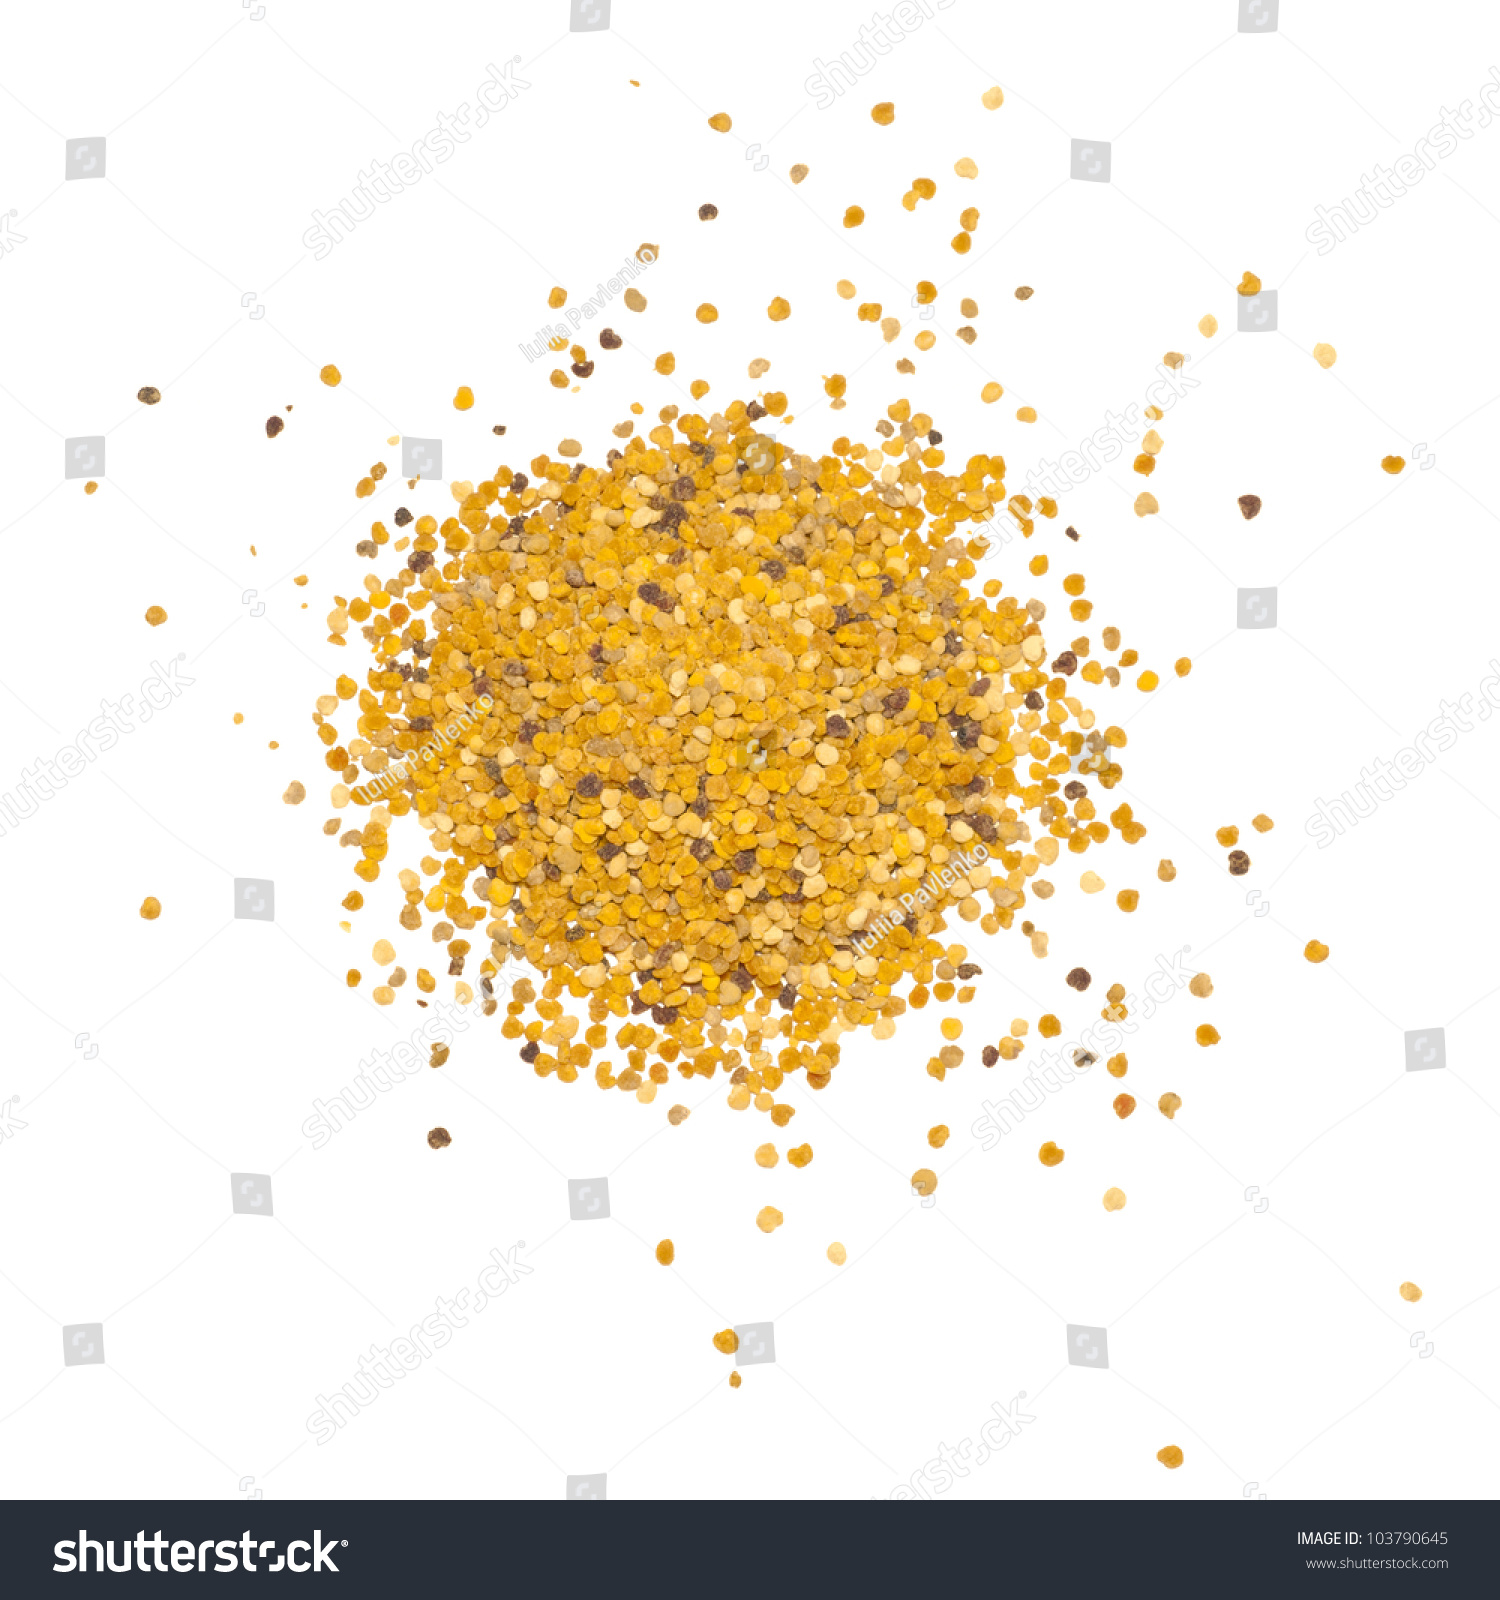 Flower Pollen Isolated On White Background. Stock Photo 103790645